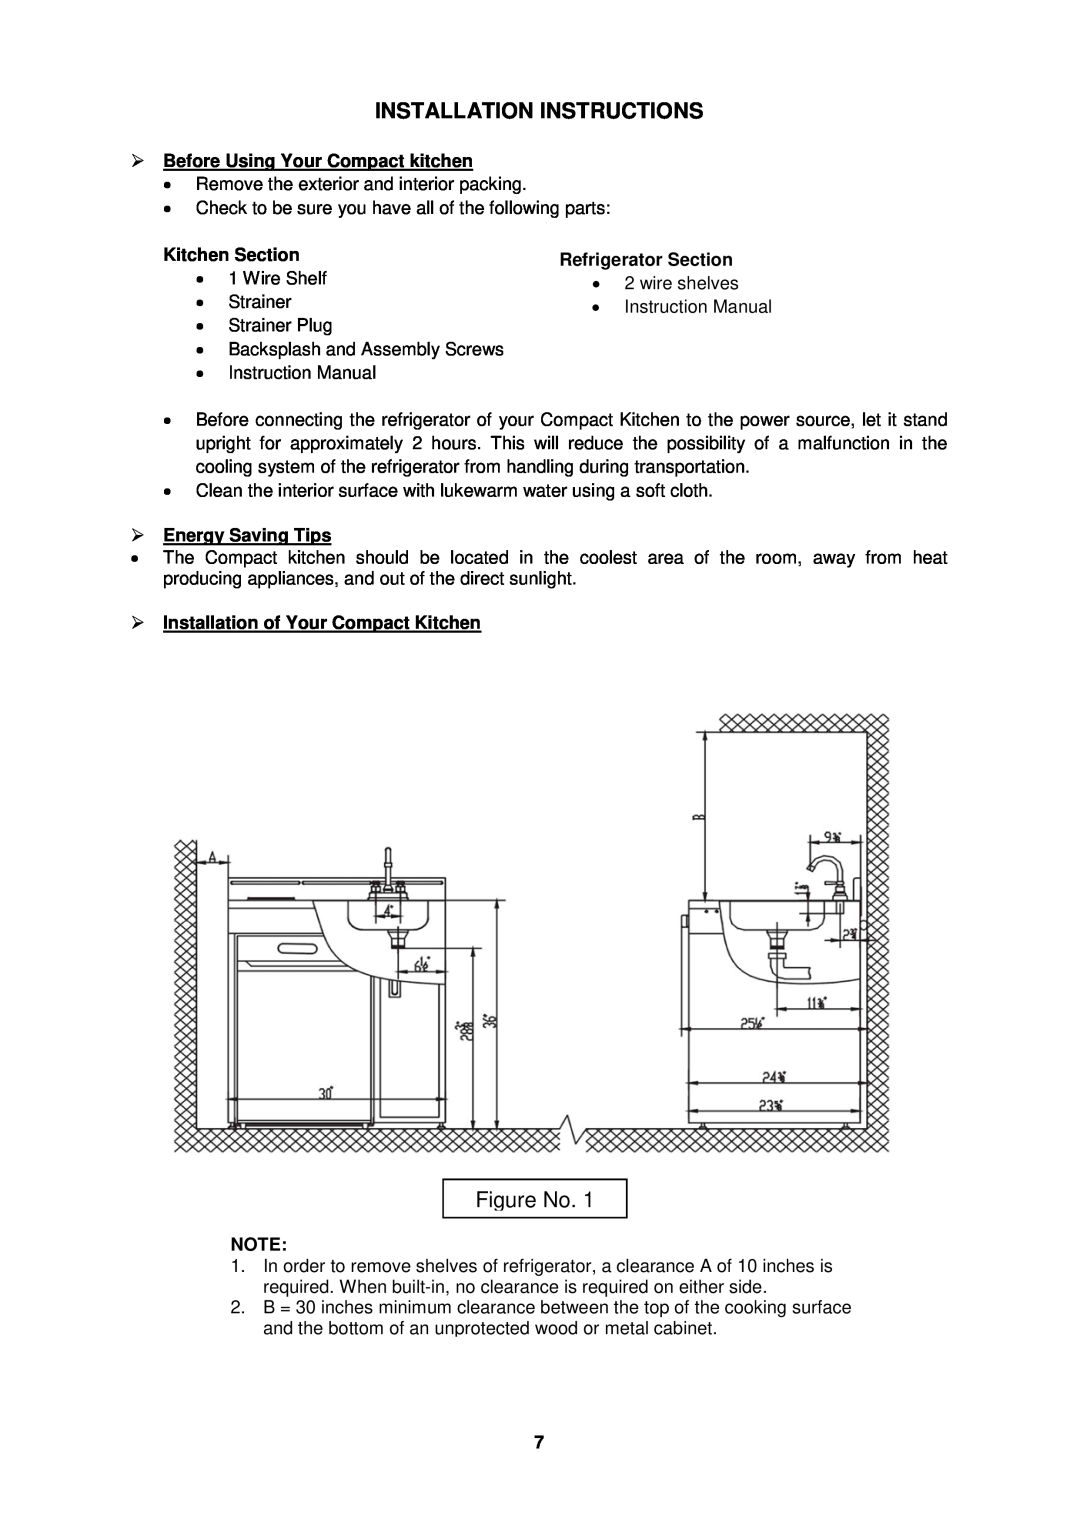 Avanti CK301SHP Installation Instructions, Figure No, Before Using Your Compact kitchen, Kitchen Section 